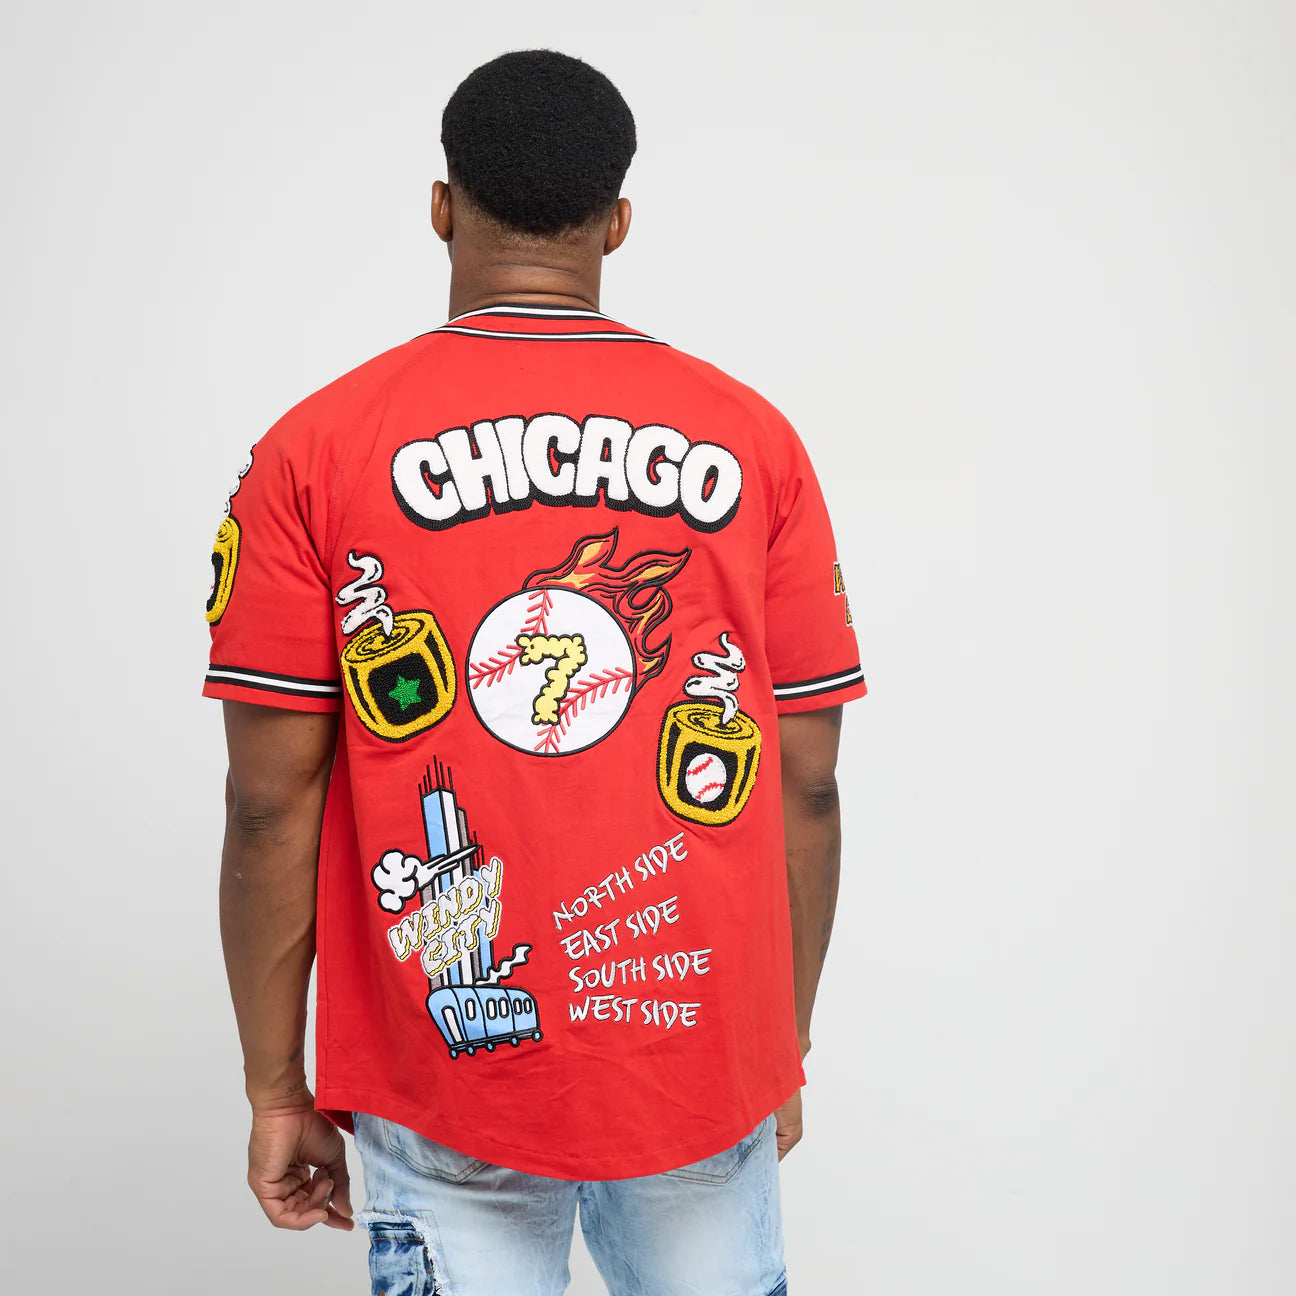 Chicago Baseball Jersey - Red